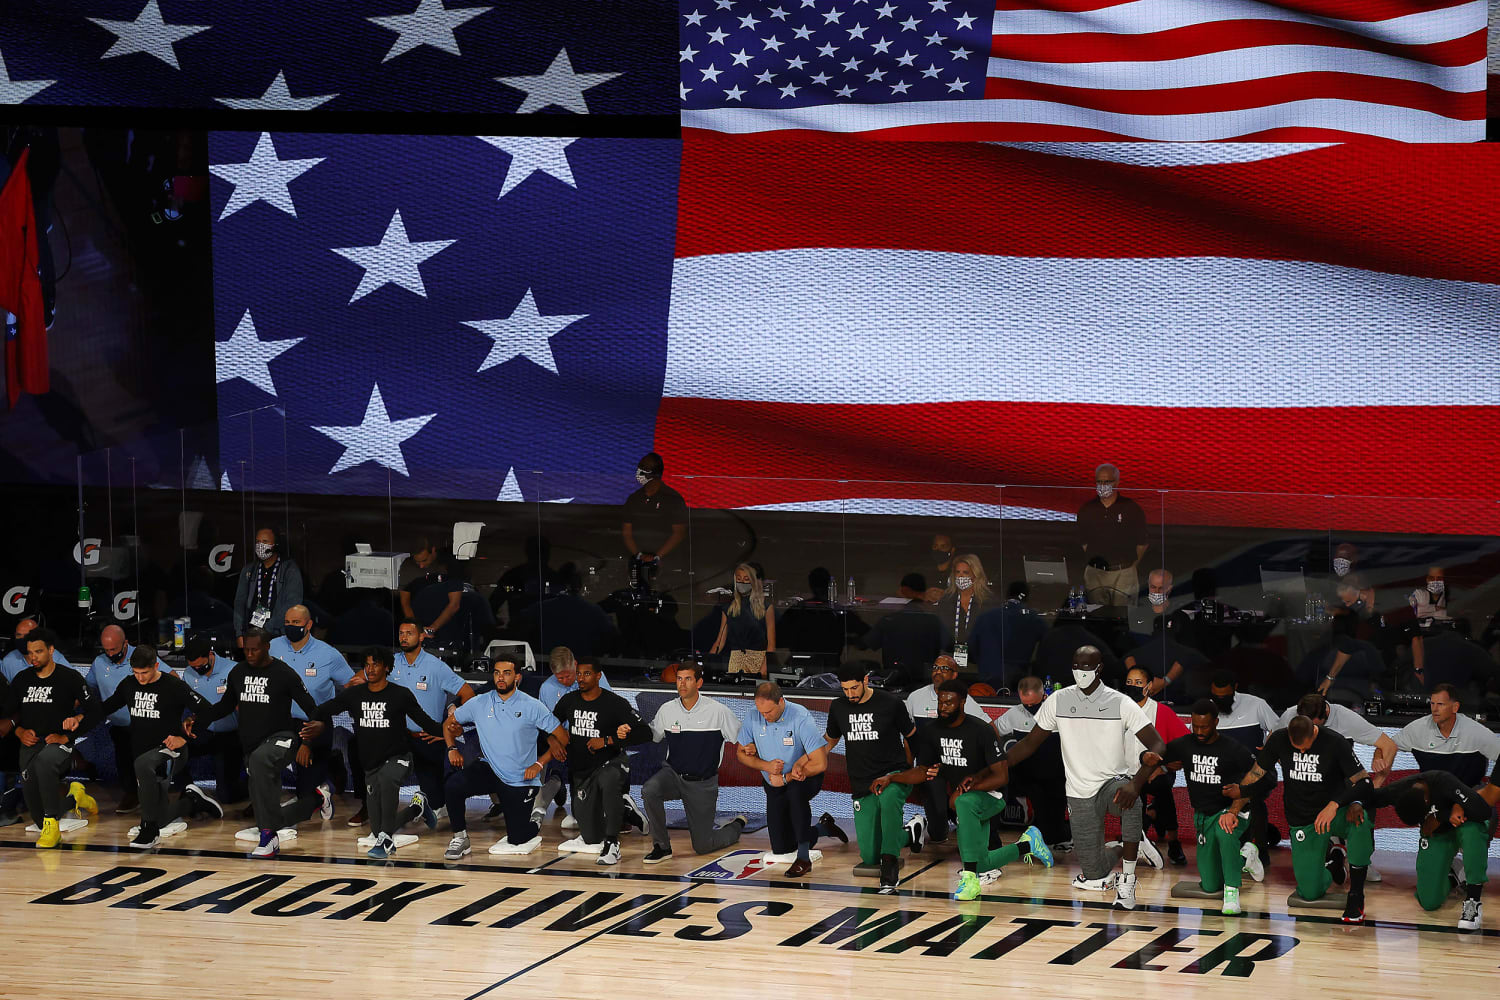 To Honor July 4 The Nba Should Skip The National Anthem Its Players Already Are